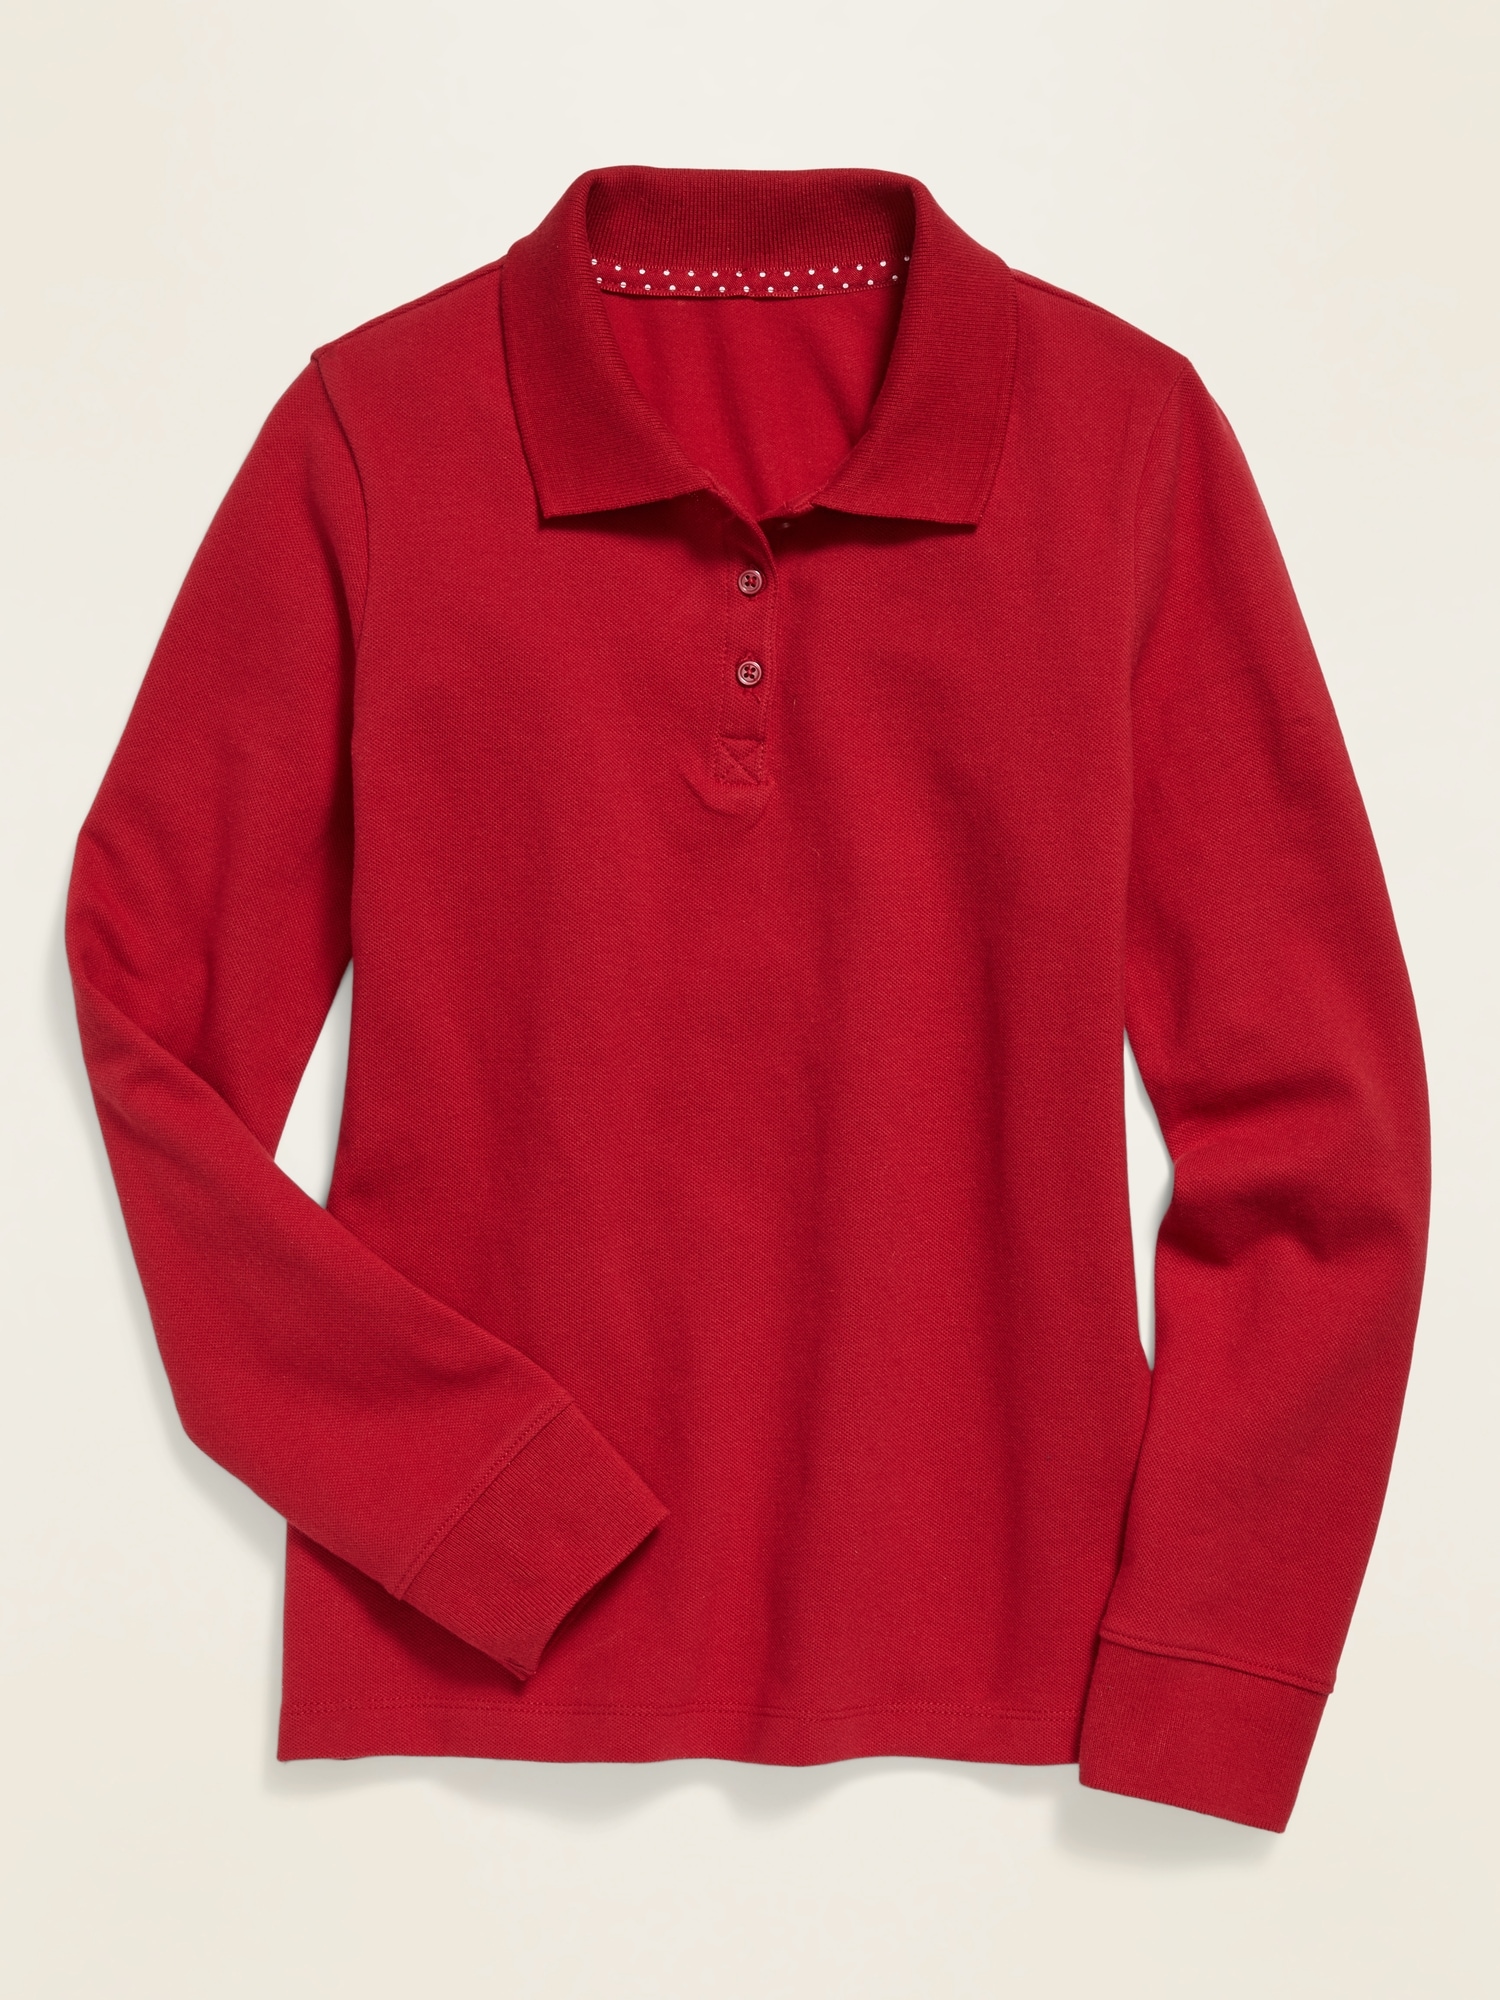 Old Navy Uniform Pique Polo Shirt for Girls red. 1